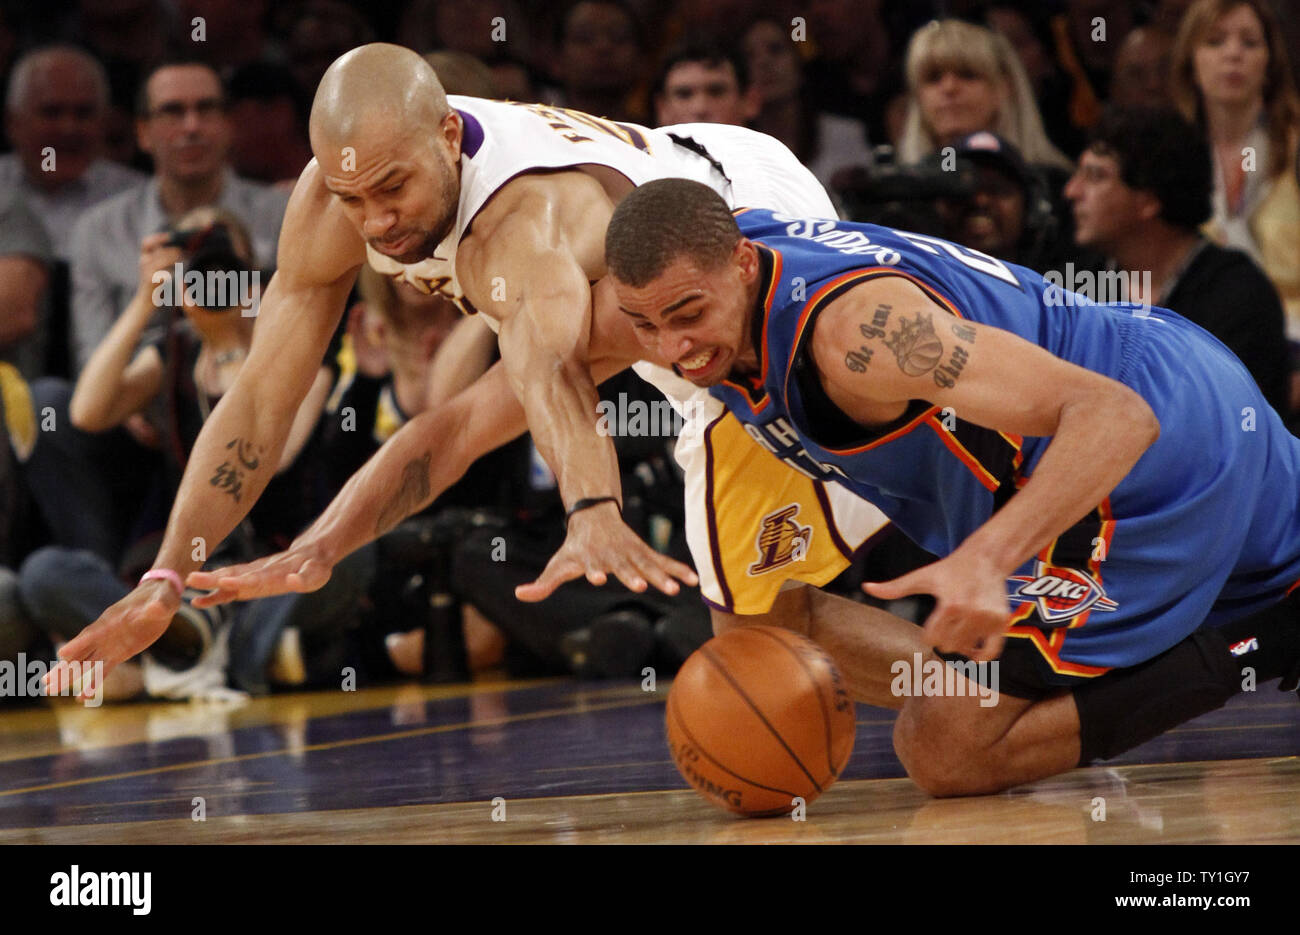 Los Angeles Lakers guard Derek Fisher (L) and Oklahoma City Thunder guard Thabo Sefolosha go for a loose ball during the first half of Game 1 of their Western Conference playoff series at Staples Center in Los Ageles on April 18, 2010. The Lakers defeated the Thunder 87-79.  UPI Photo/Lori Shepler Stock Photo